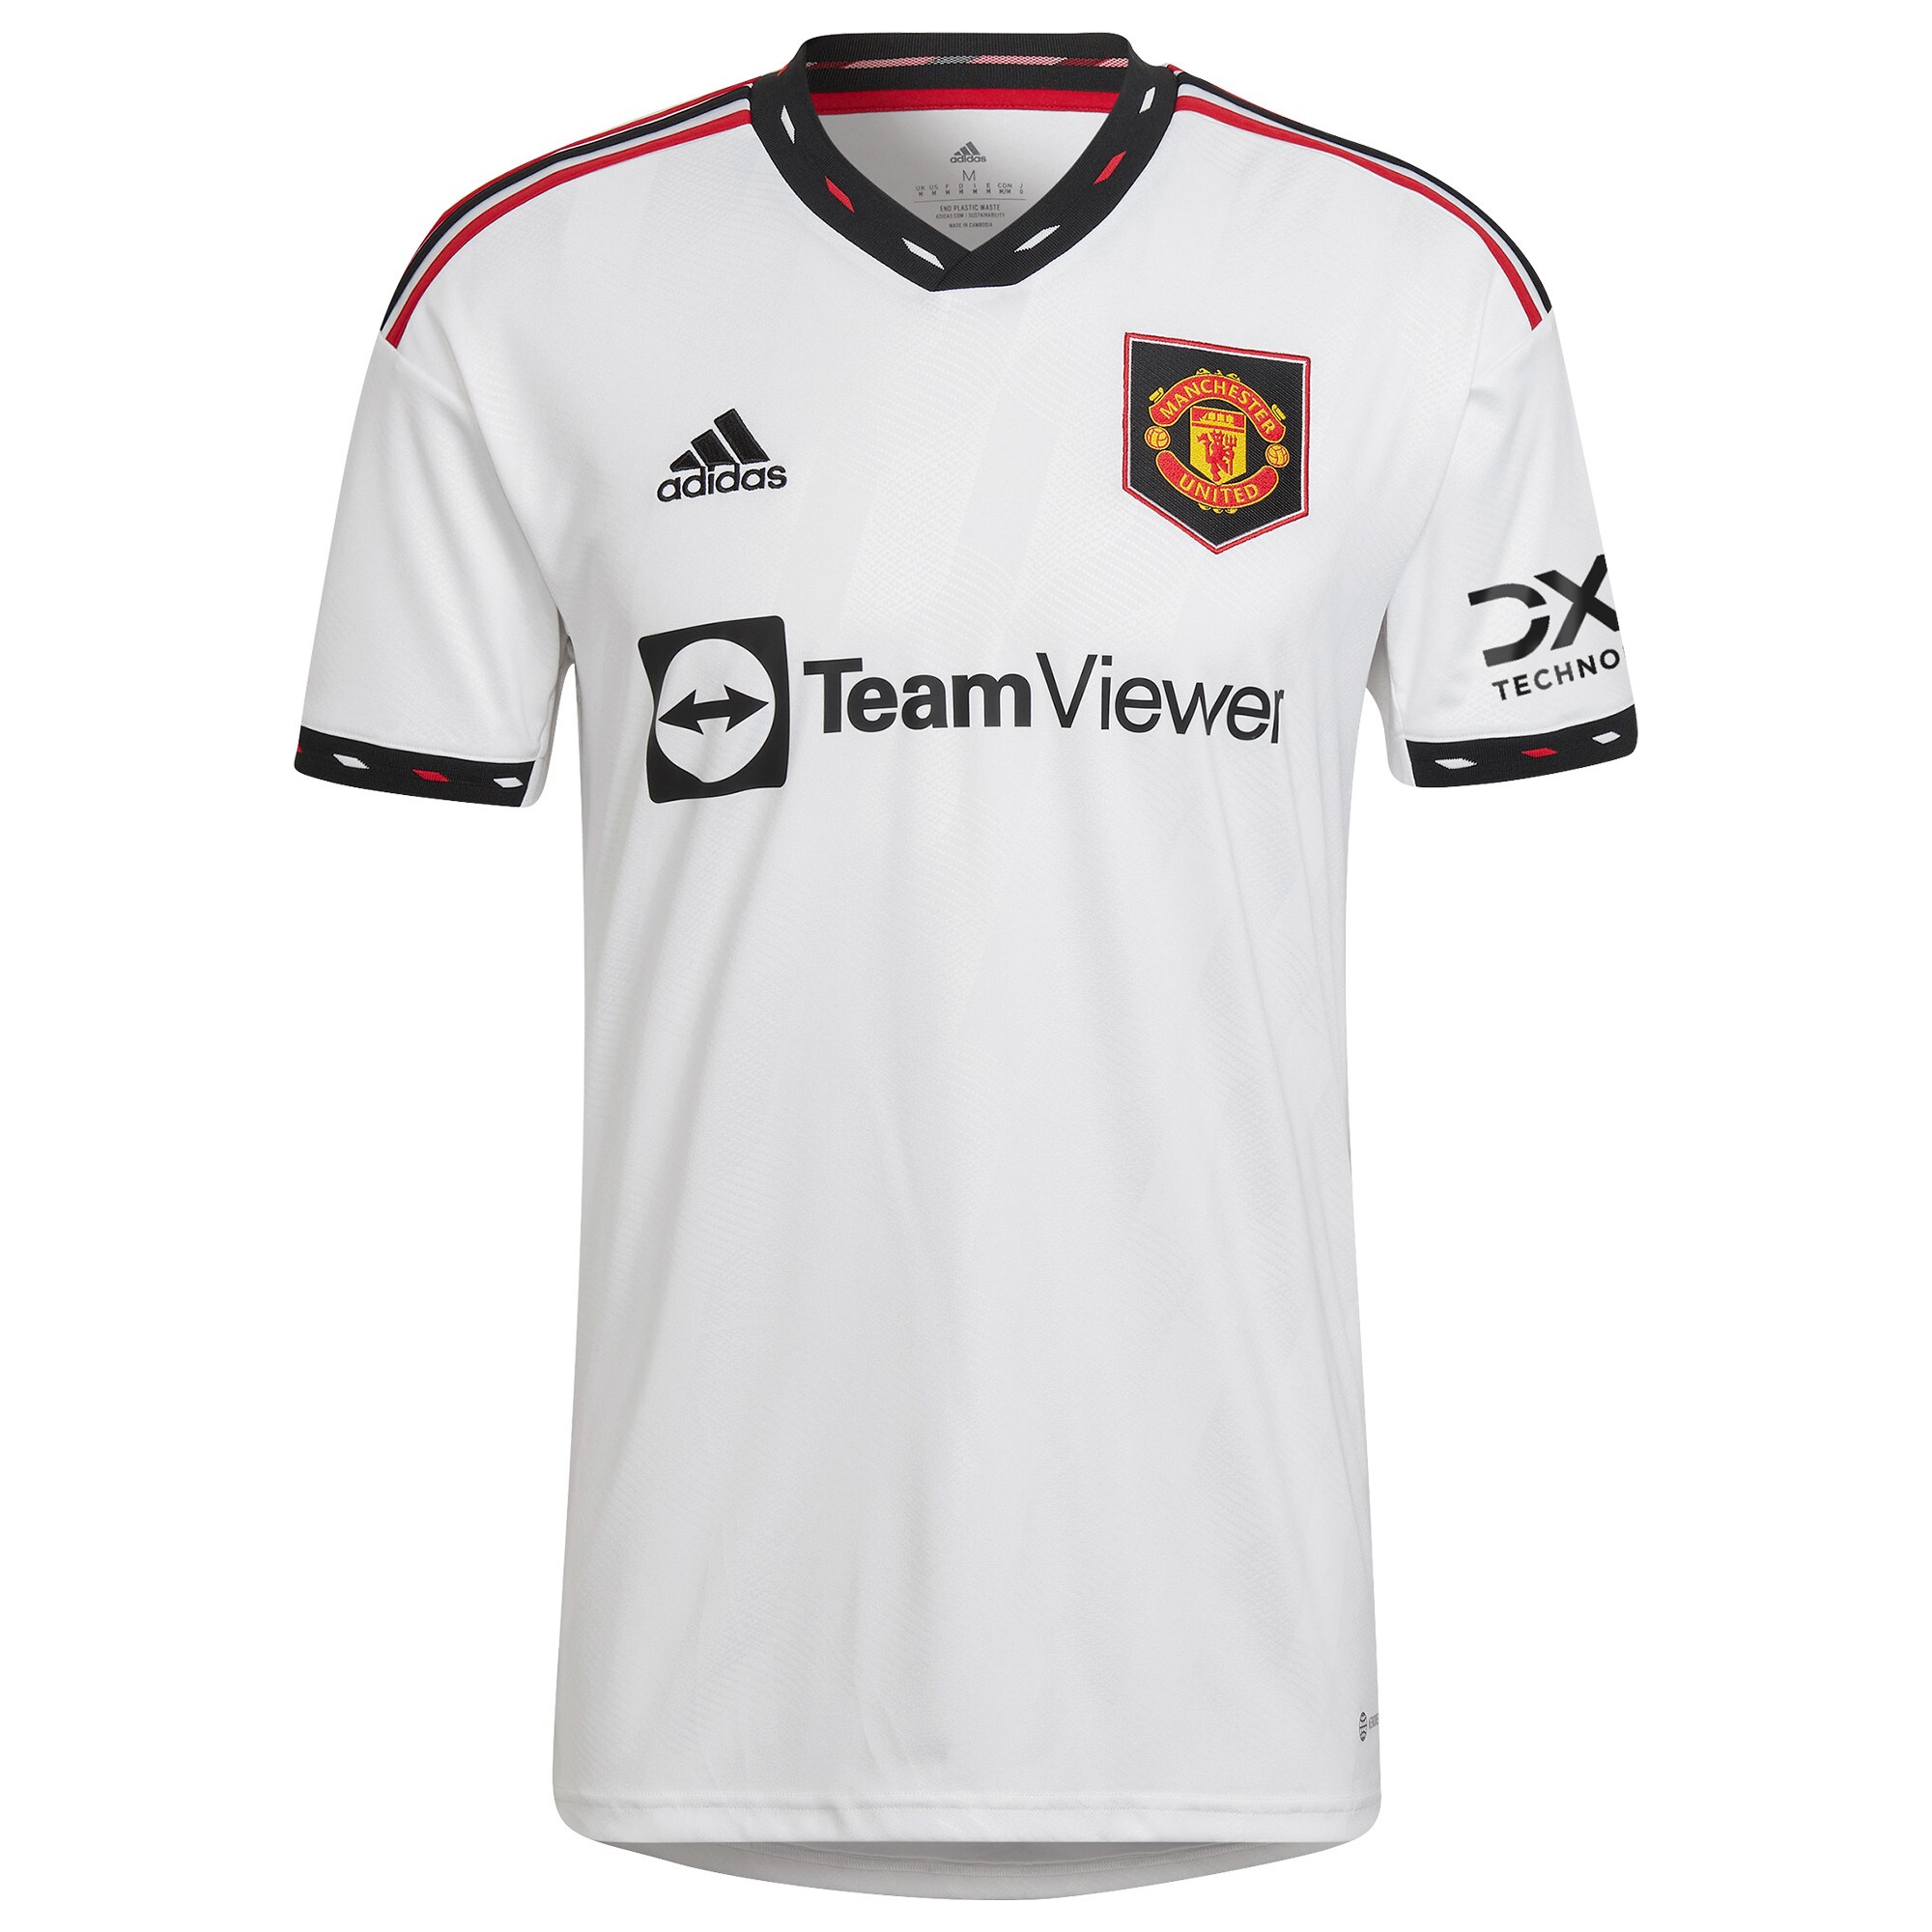 Manchester United Cup Away Shirt 2022-23 with Groenen 14 printing